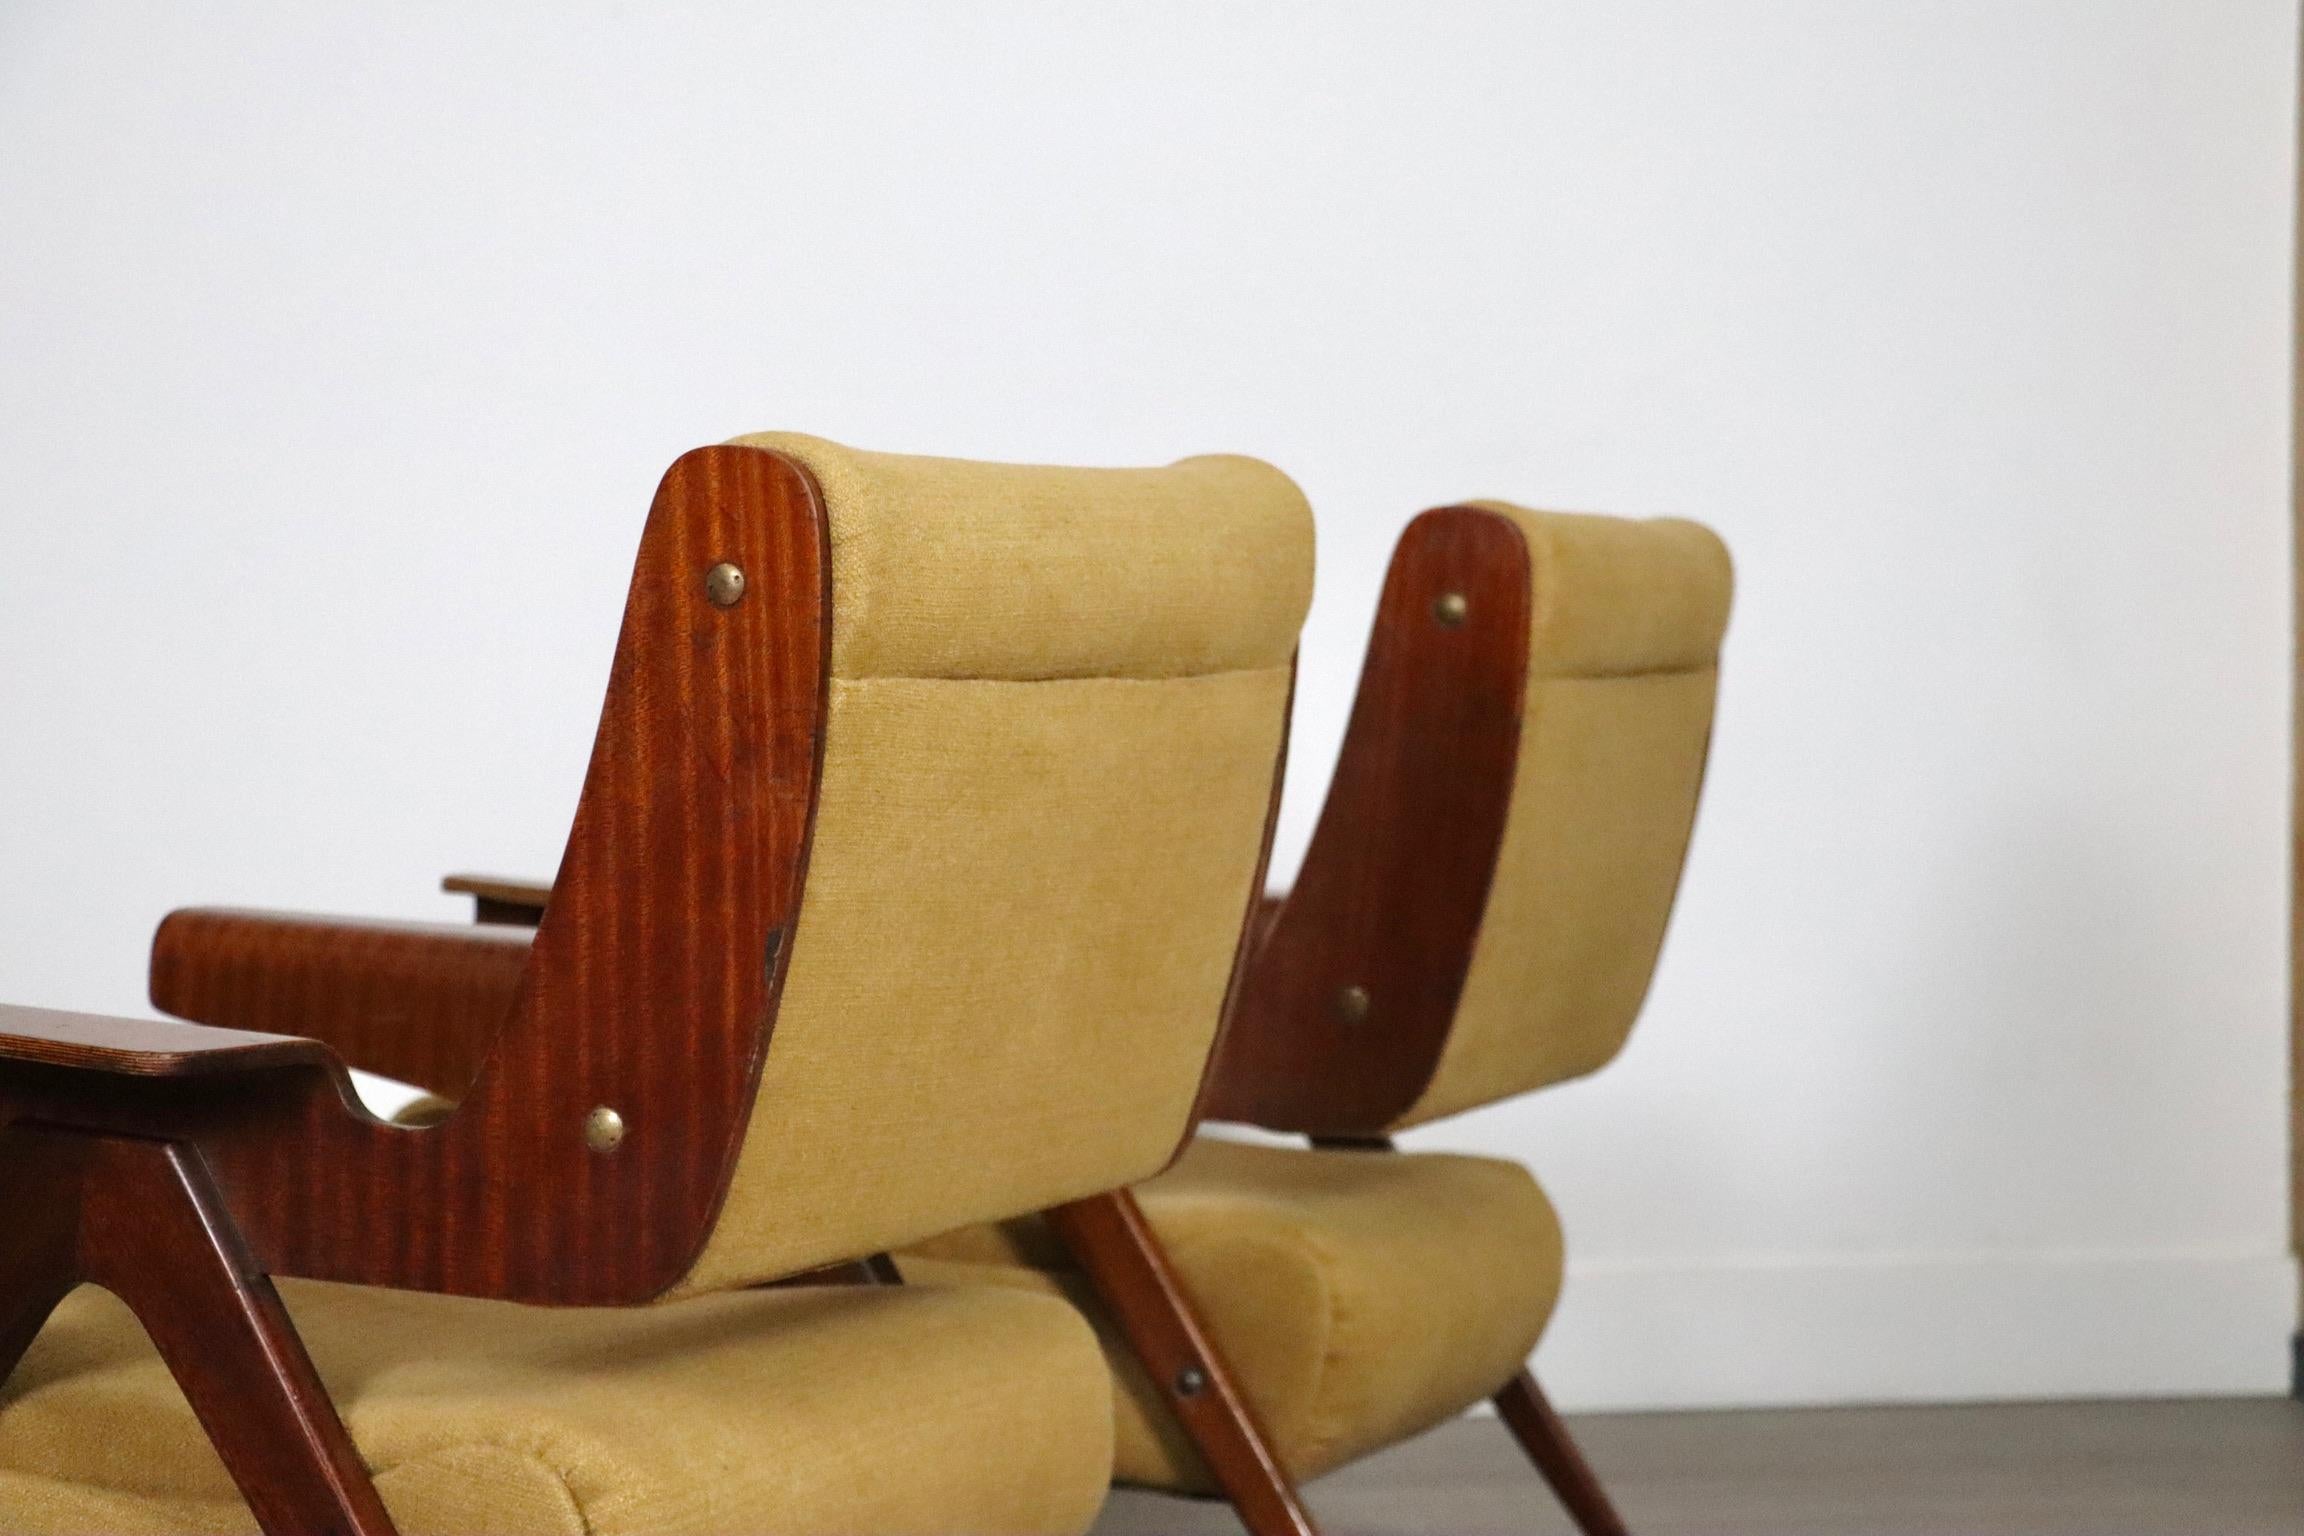 Pair Of Gianfranco Frattini Model 831 Lounge Chairs For Cassina, 1950s For Sale 4